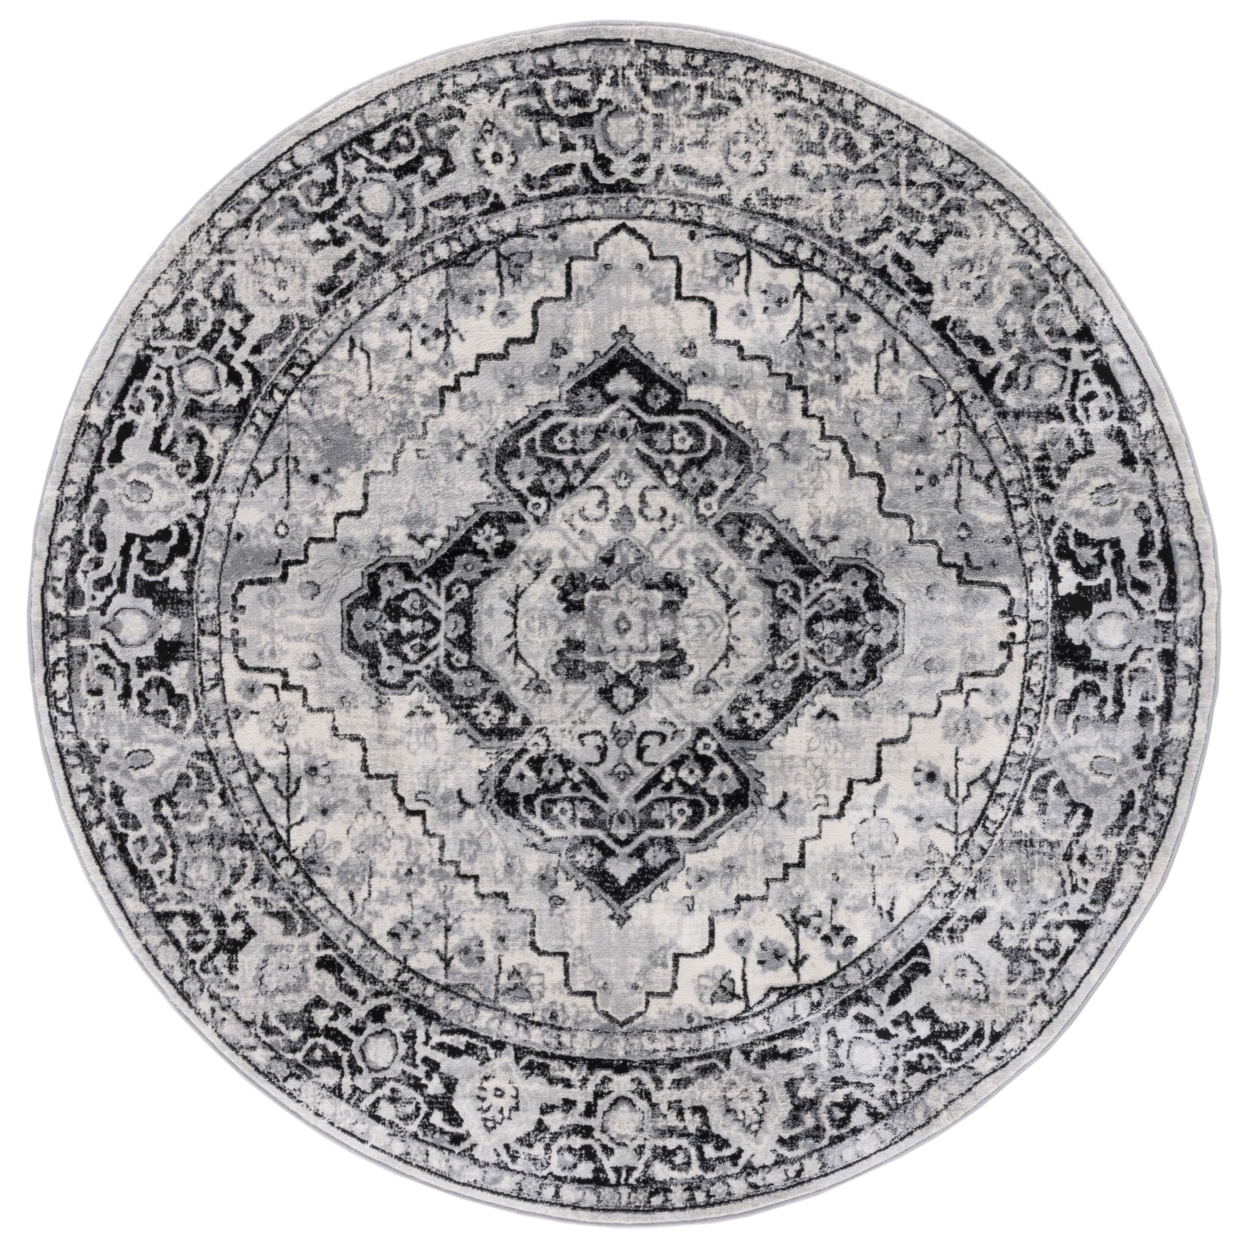 SAFAVIEH Brentwood Collection BNT888Z Black / Ivory Rug - 6' 7 Round